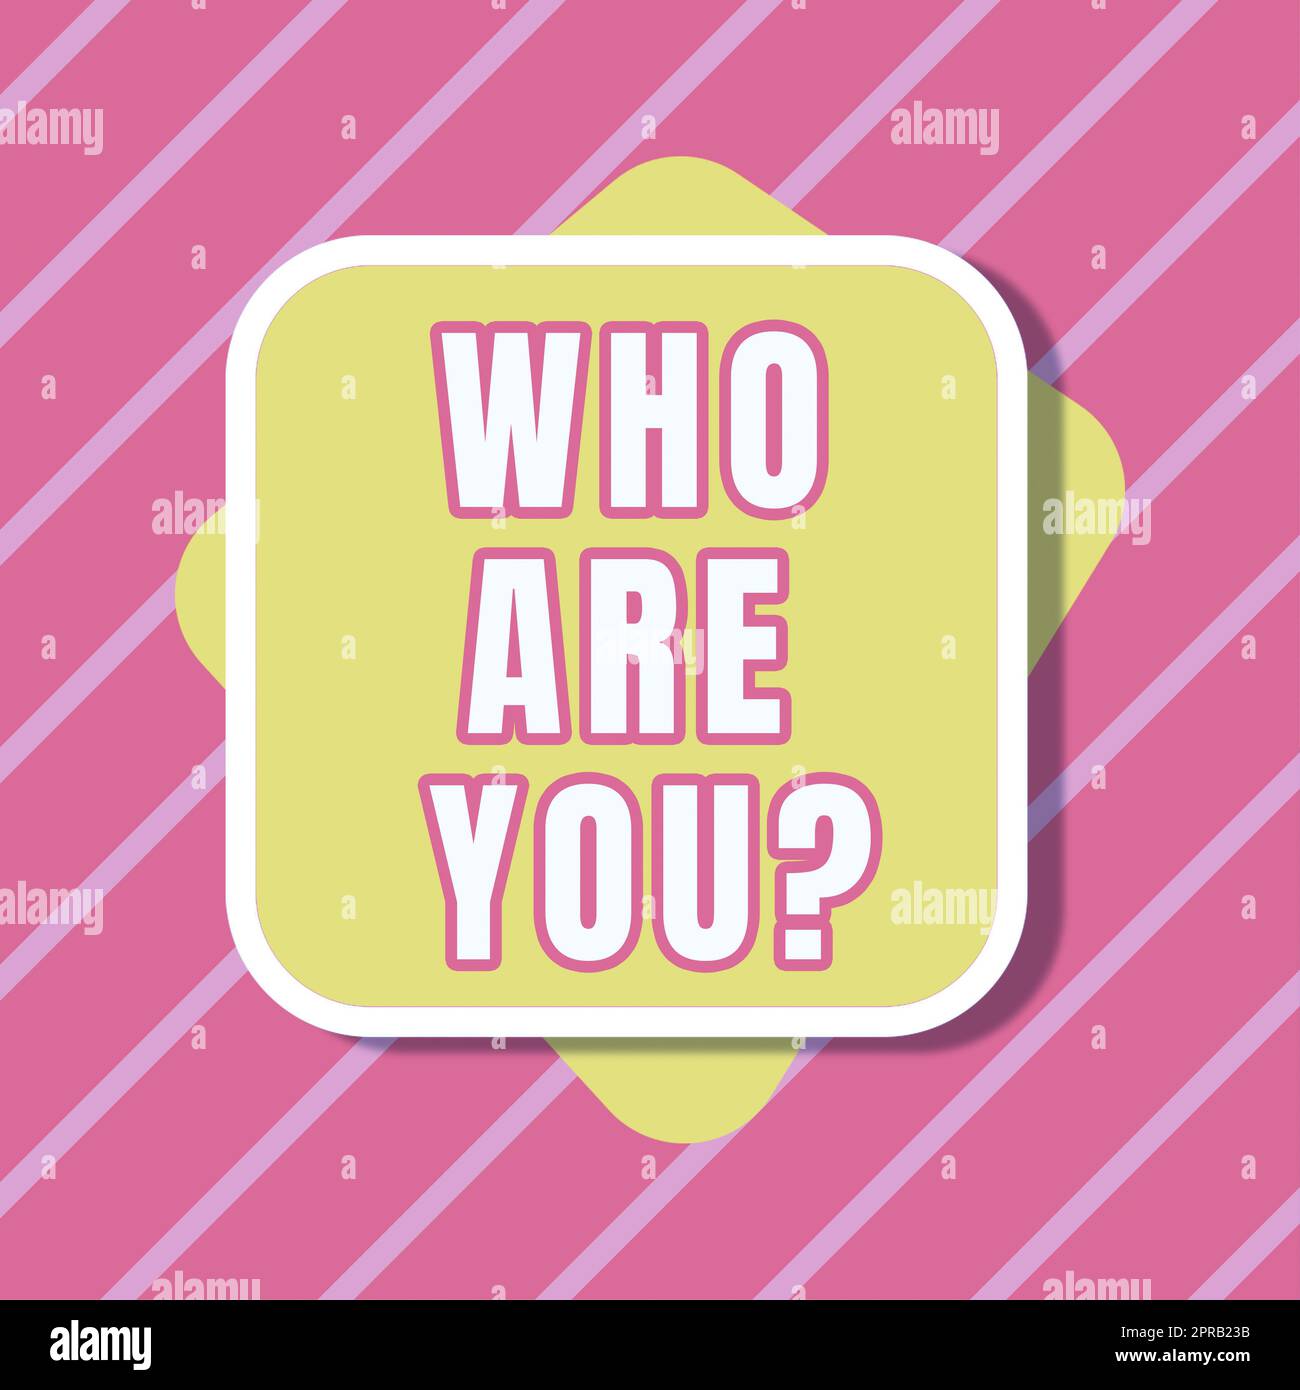 Sign displaying Who Are You. Business showcase Introduce Identify yourself personality likes dislikes Blank Square And Rectangular Shapes For Promotion Of Business. Stock Photo